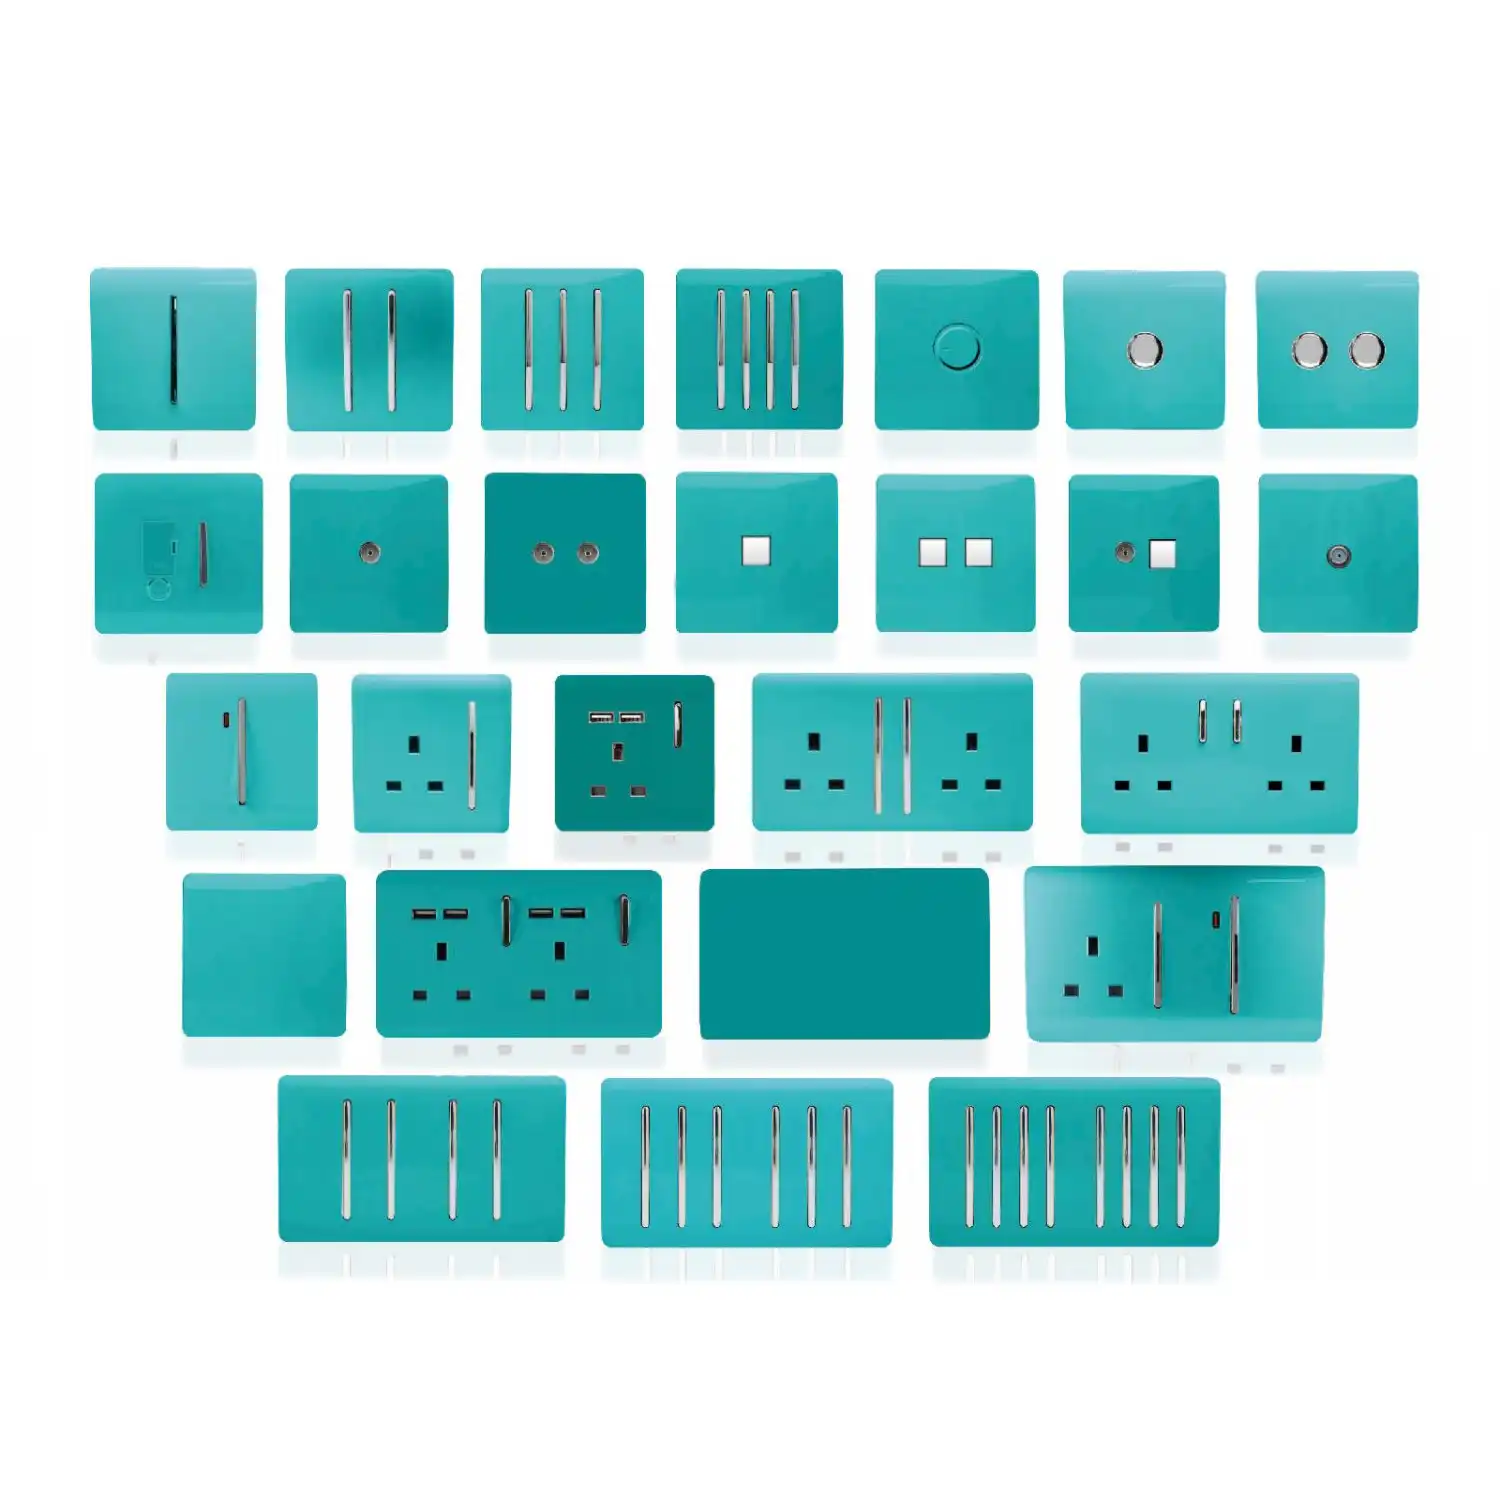 Trendi, Artistic Modern 2 Gang 2 Way LED Dimmer Switch 5 150W LED 120W Tungsten Per Dimmer, Bright Teal Finish, (35mm Back Box Required) 5yrs Wrnty